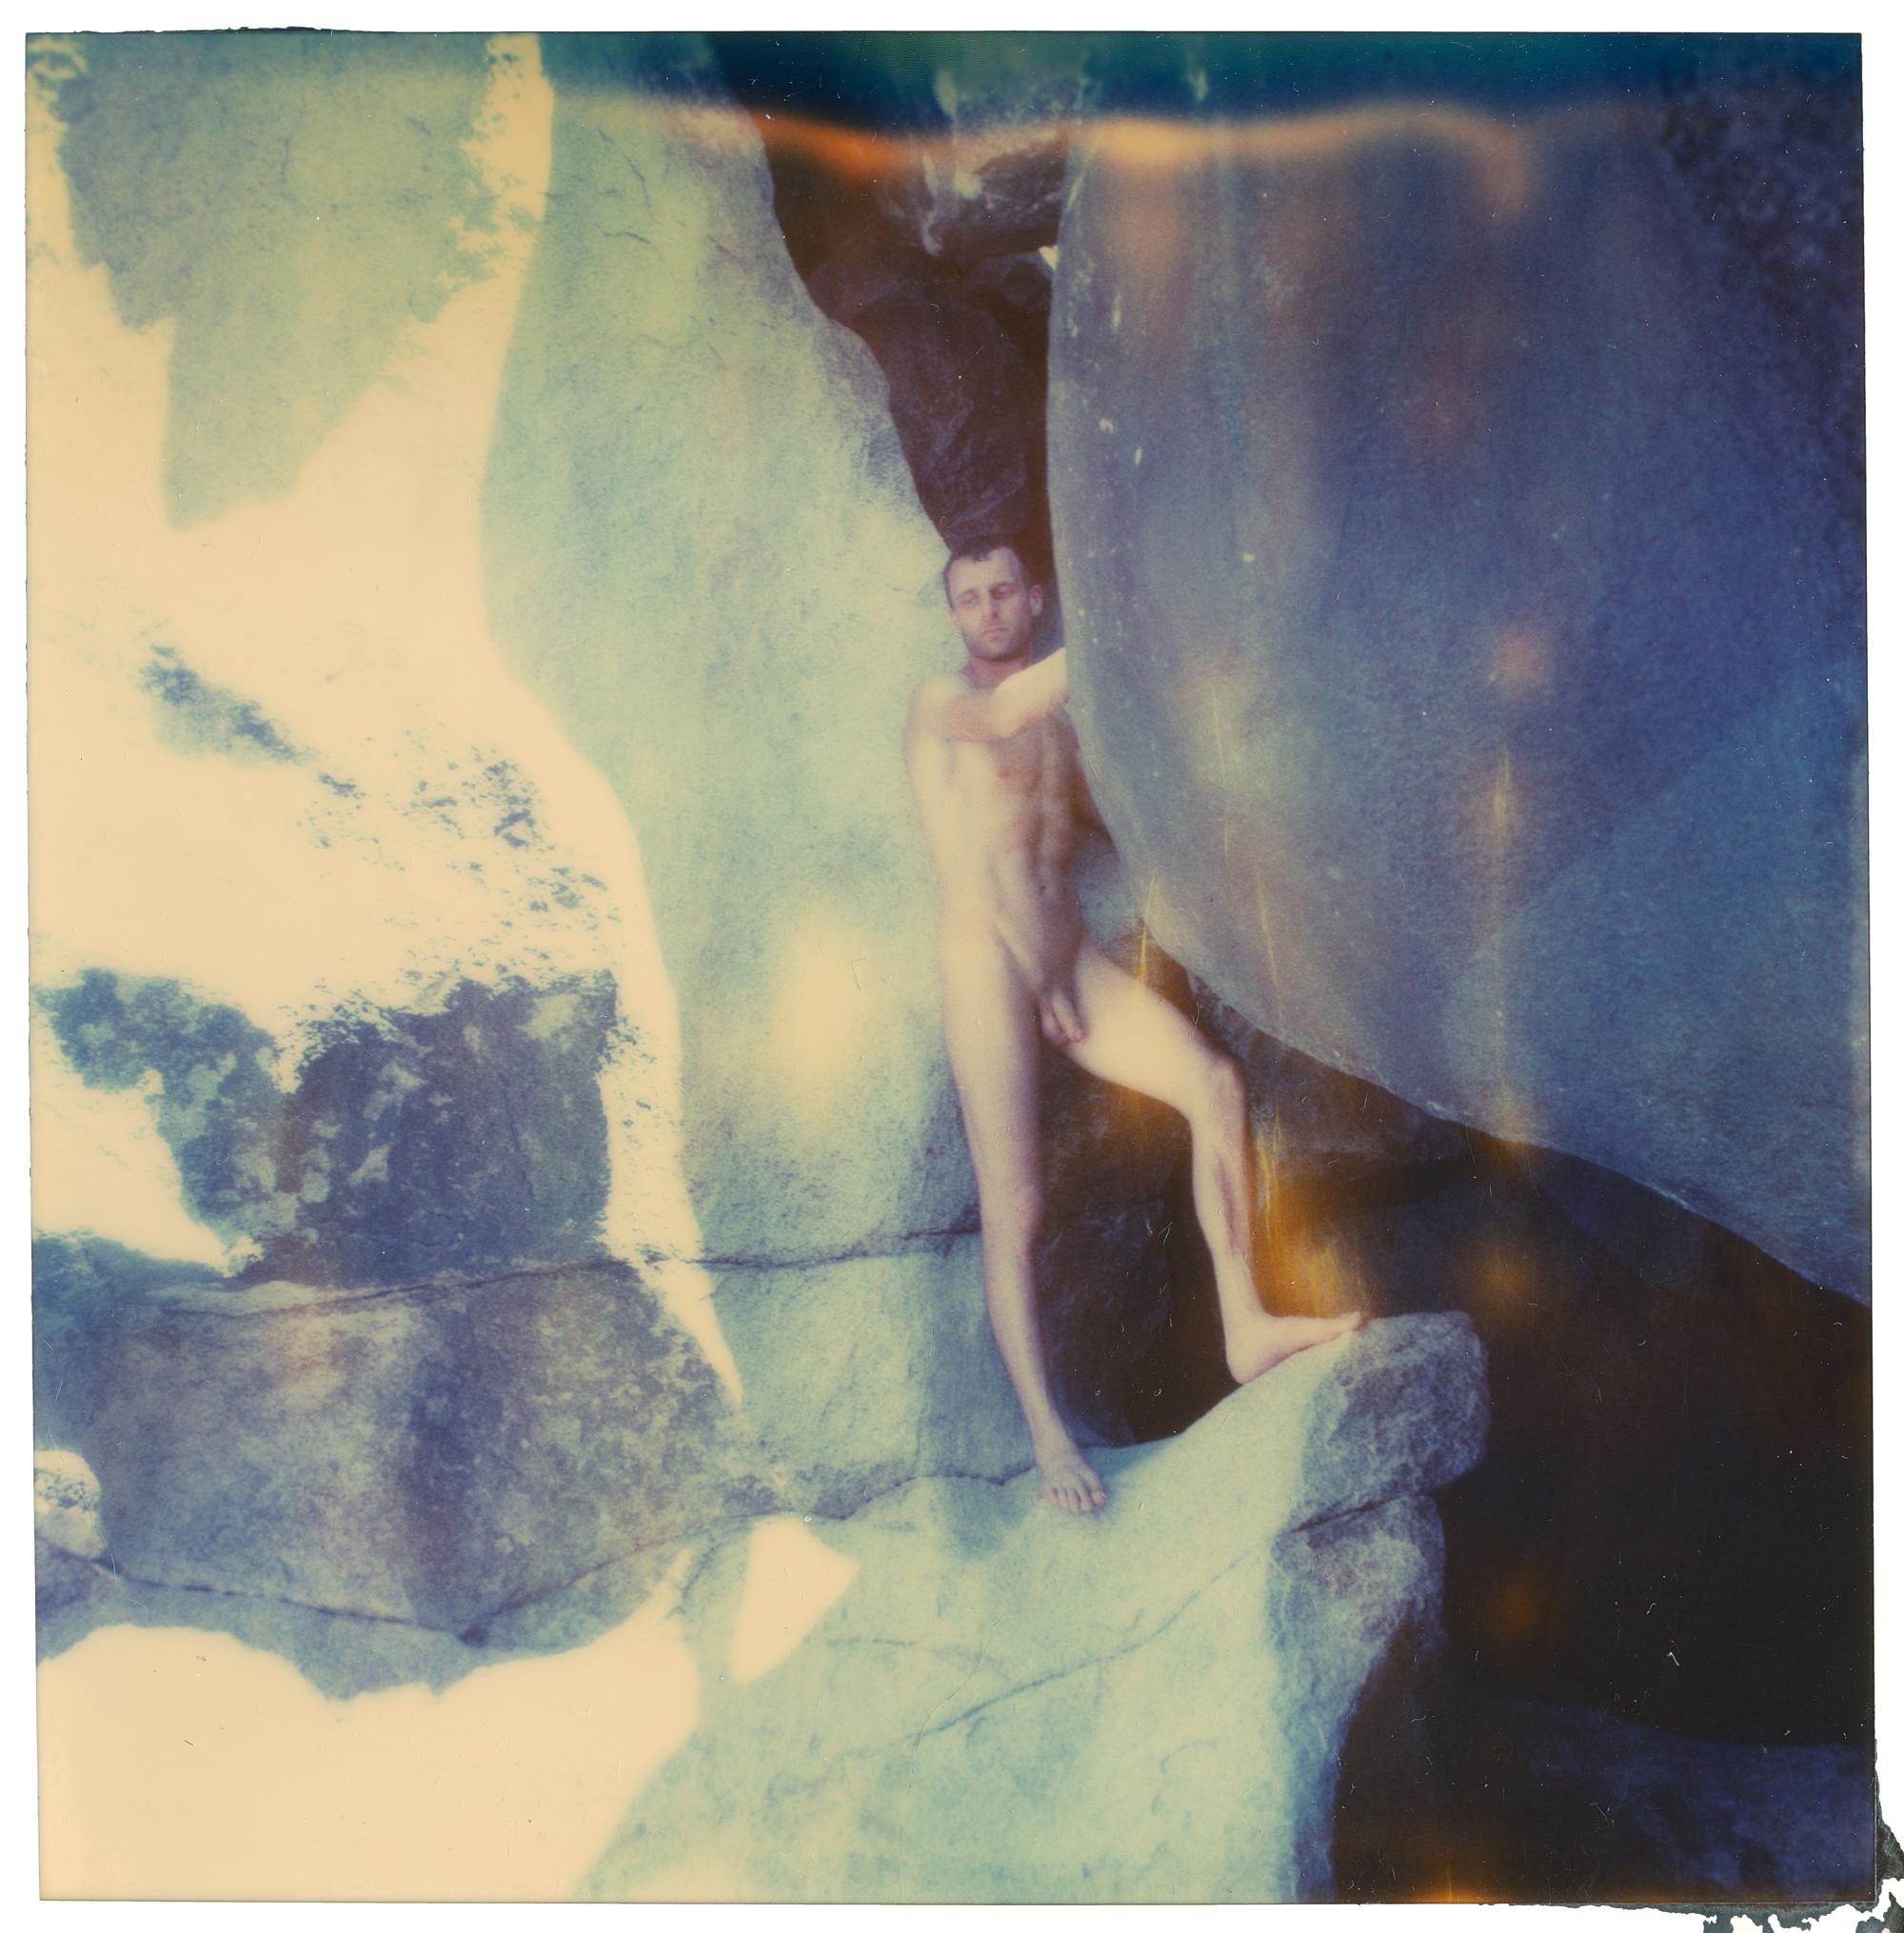 Planet of the Apes X  - Polaroid, Color, Nude, Men, Contemporary 